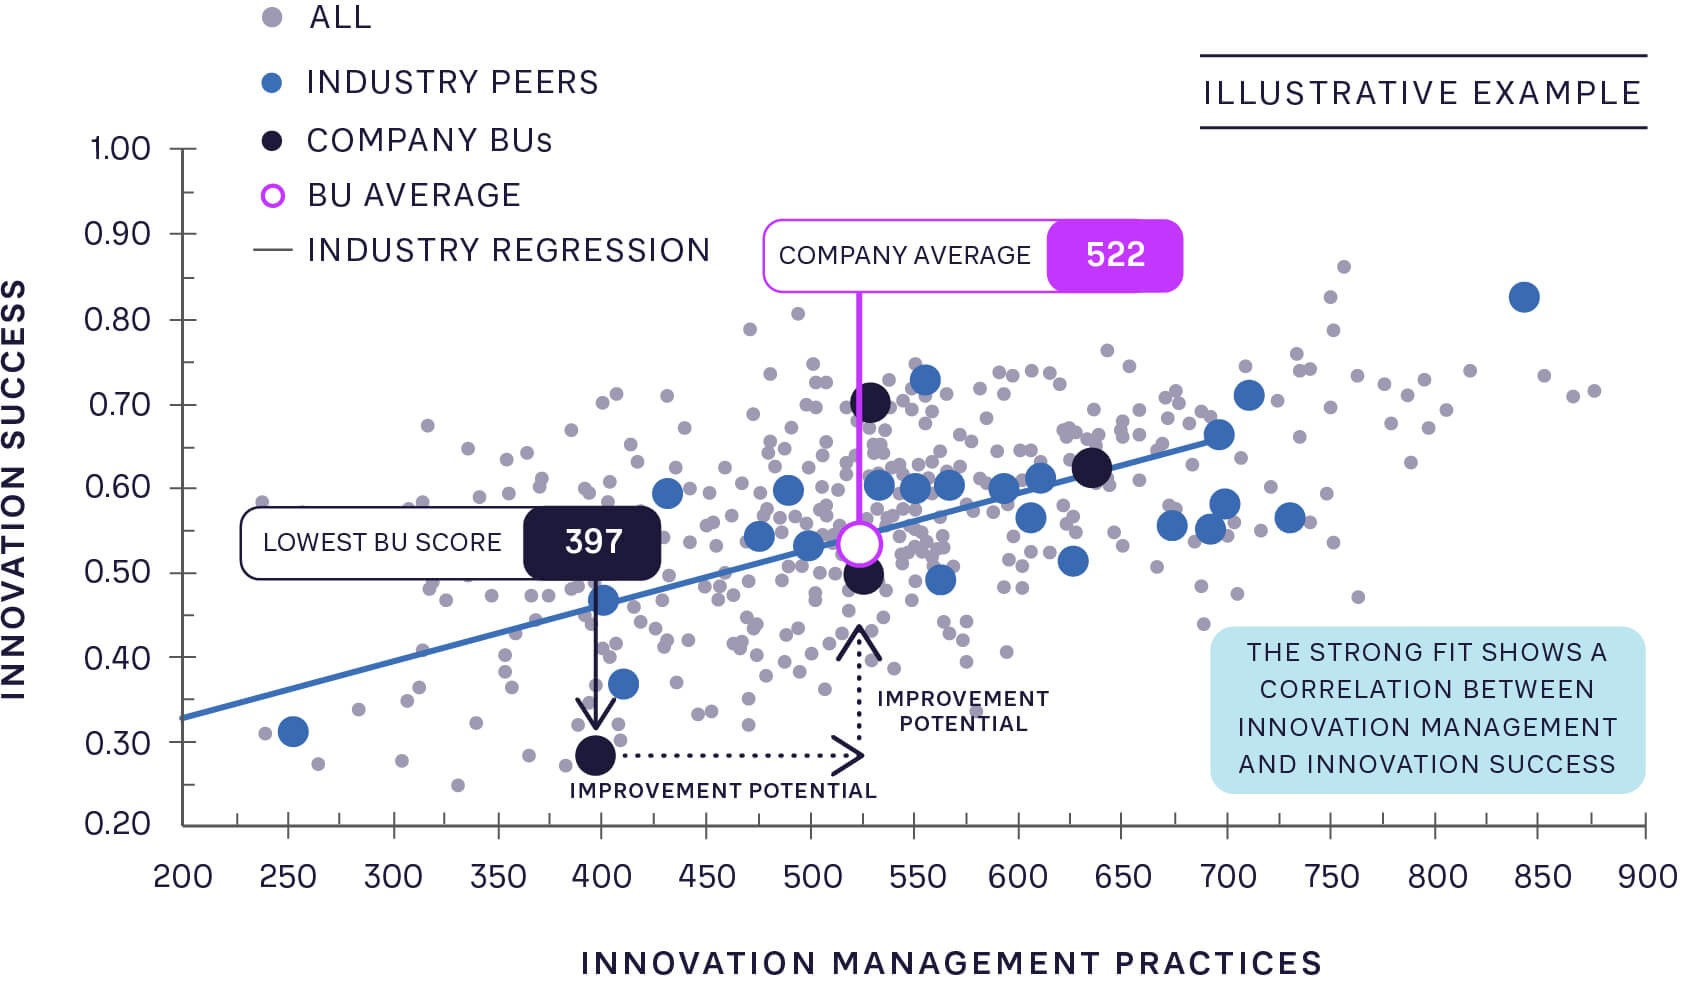 FIGURE 1: THE RELATIONSHIP BETWEEN INNOVATION MANAGEMENT PRACTICES AND INNOVATION SUCCESS IN THE CHEMICAL SECTOR